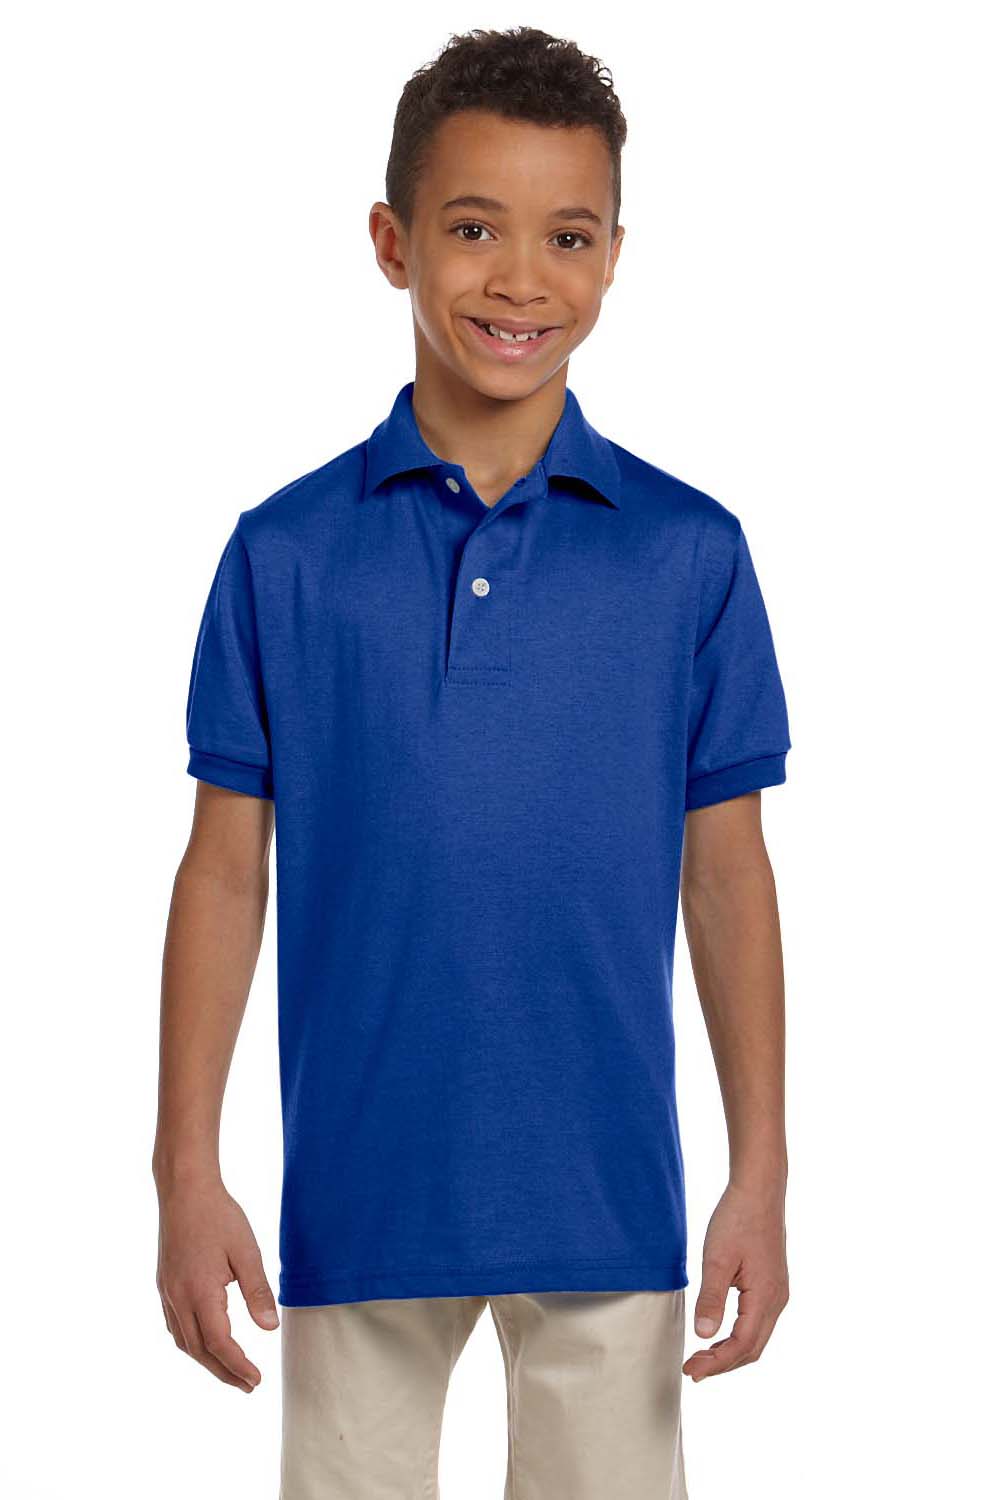 Jerzees 437Y Youth SpotShield Stain Resistant Short Sleeve Polo Shirt Royal Blue Front